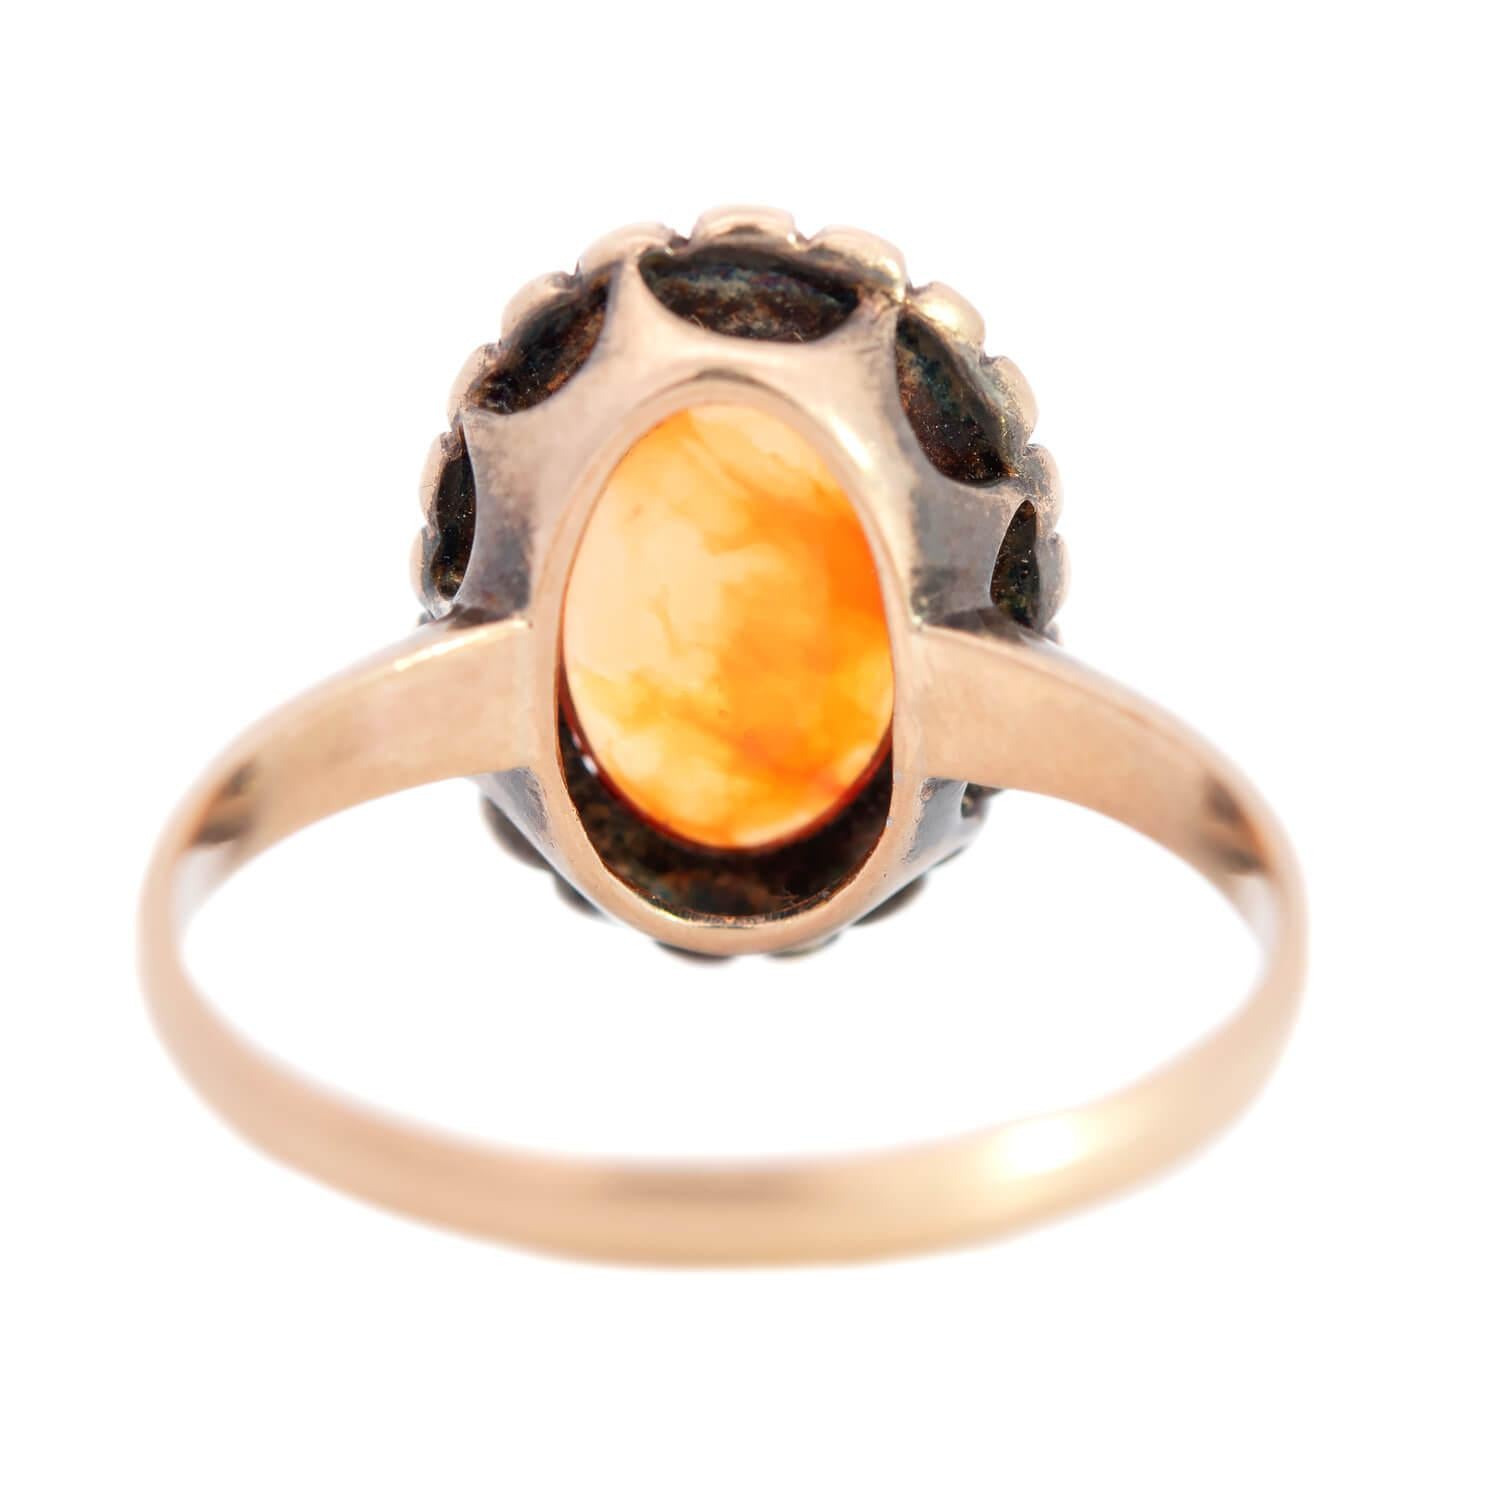 Edwardian 14k Mexican Jelly Opal and Diamond Ring